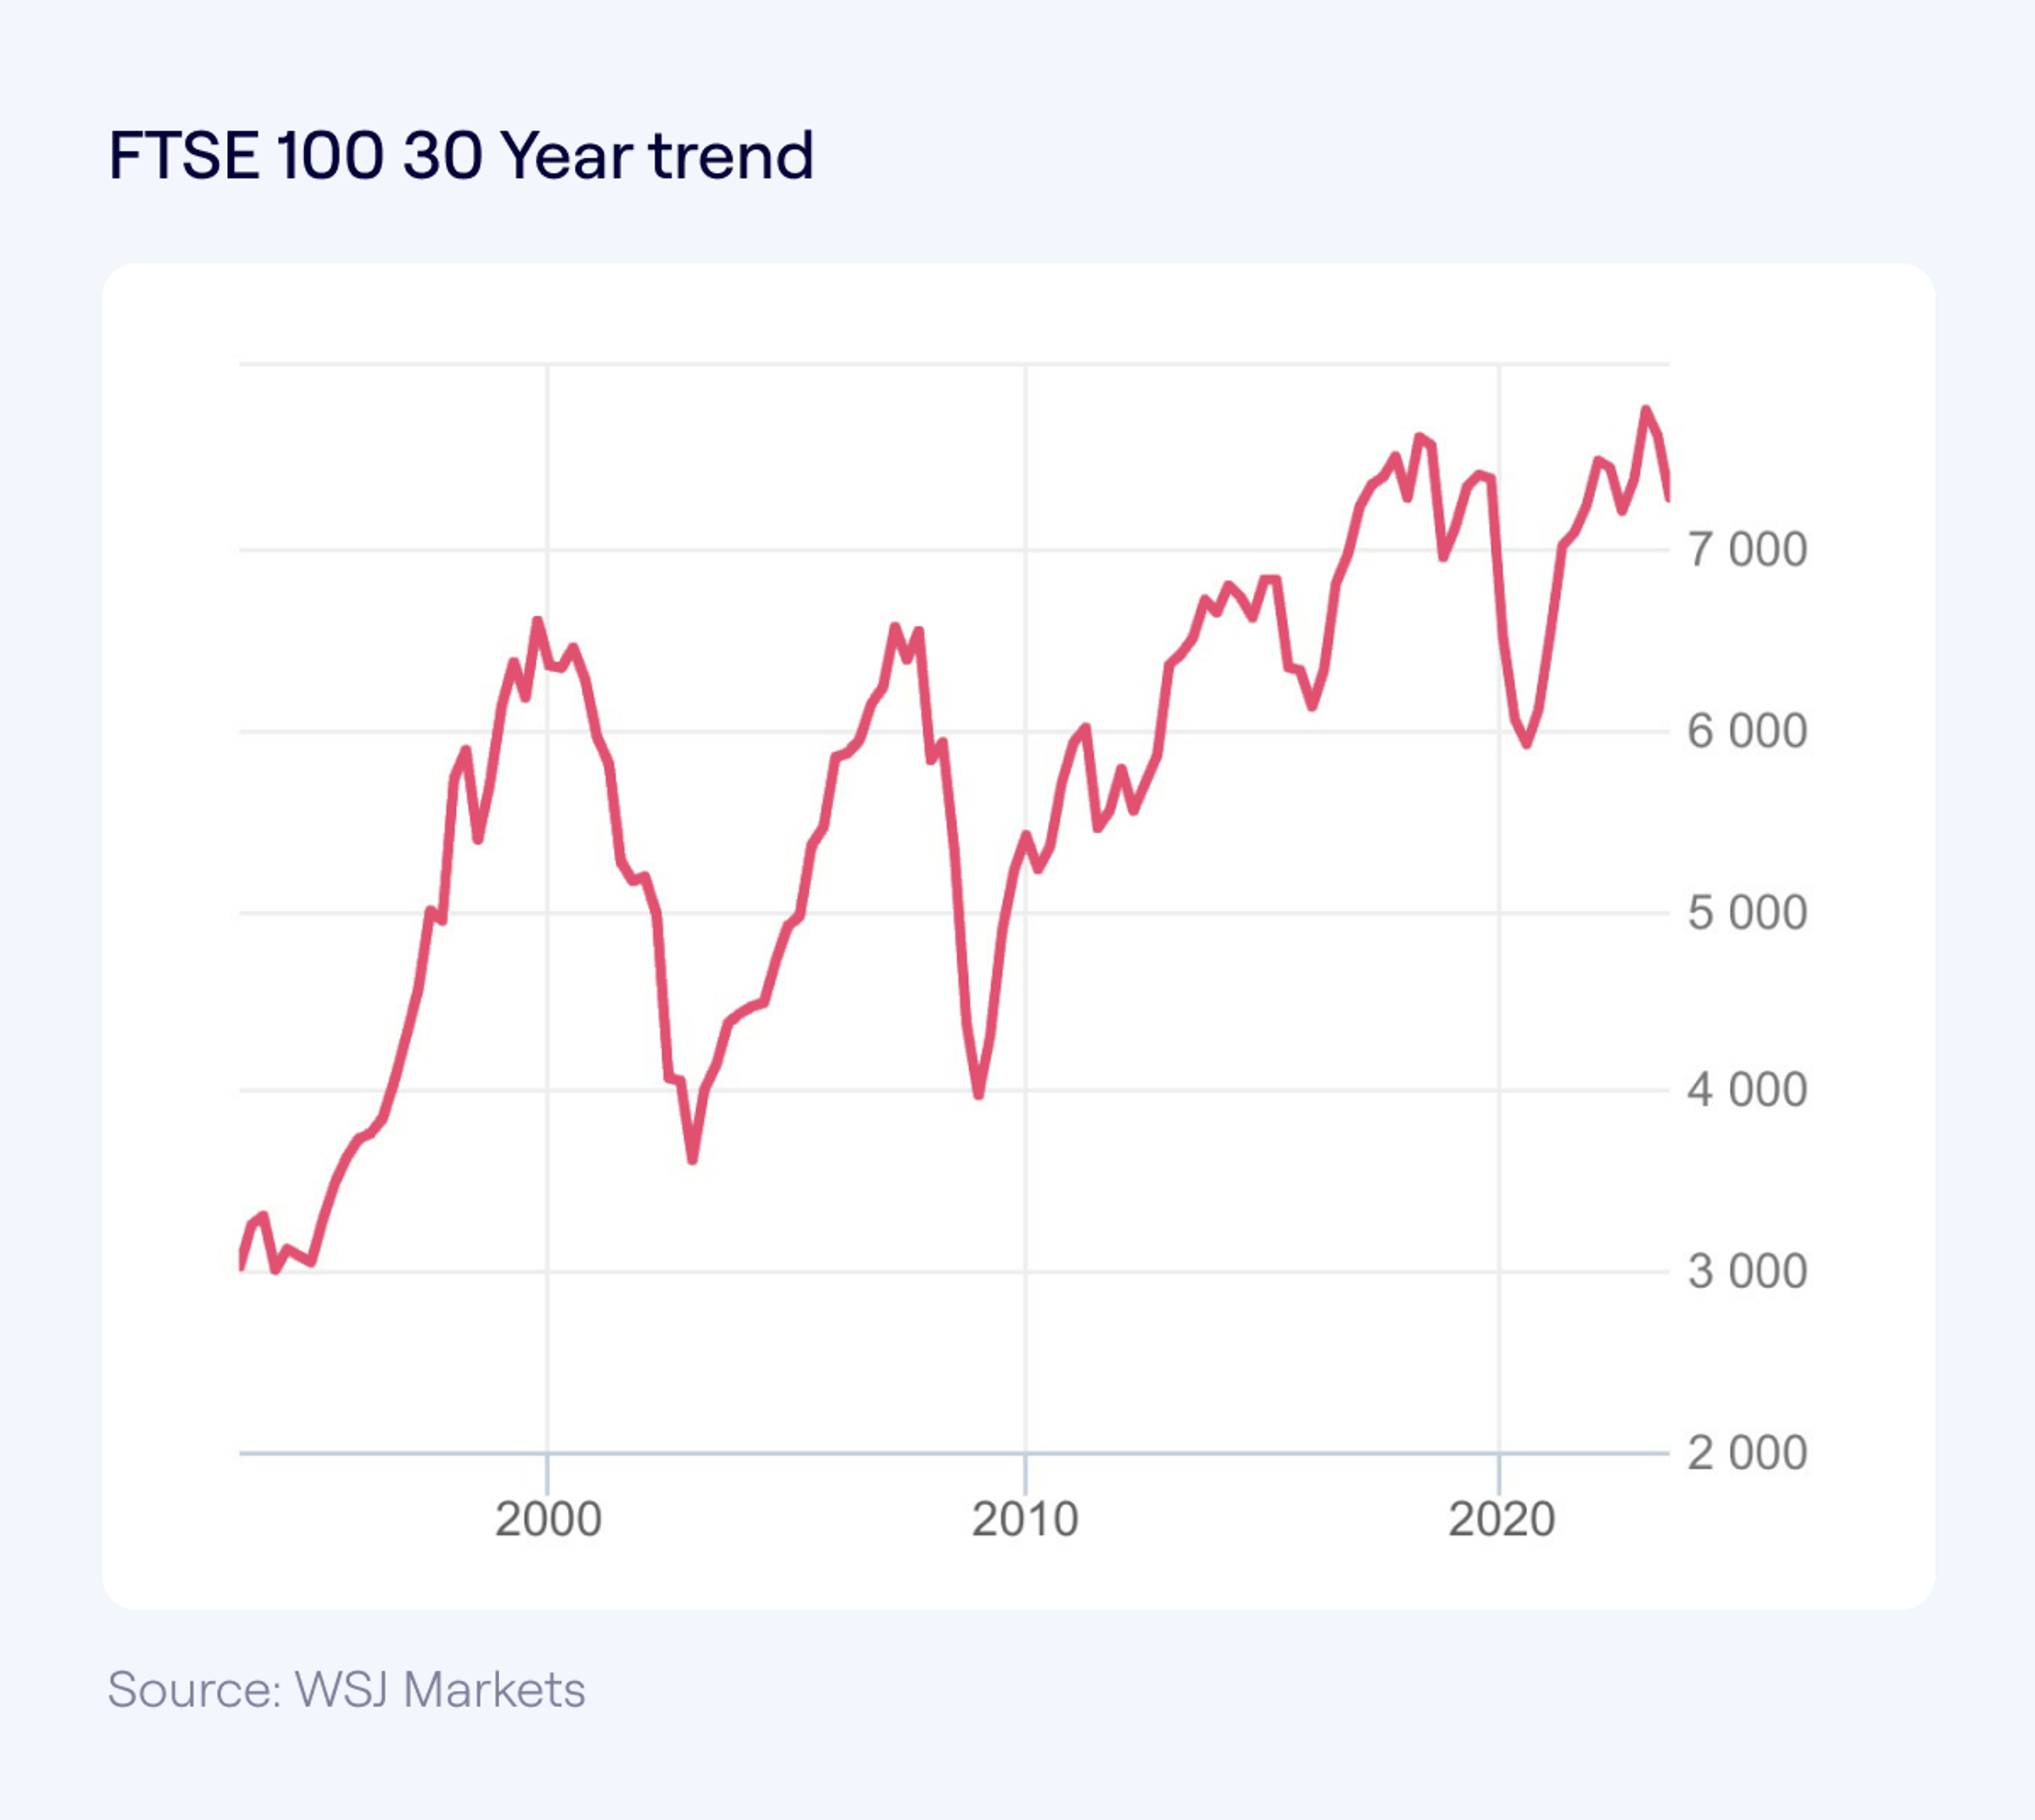 FTSE100 30 year trend